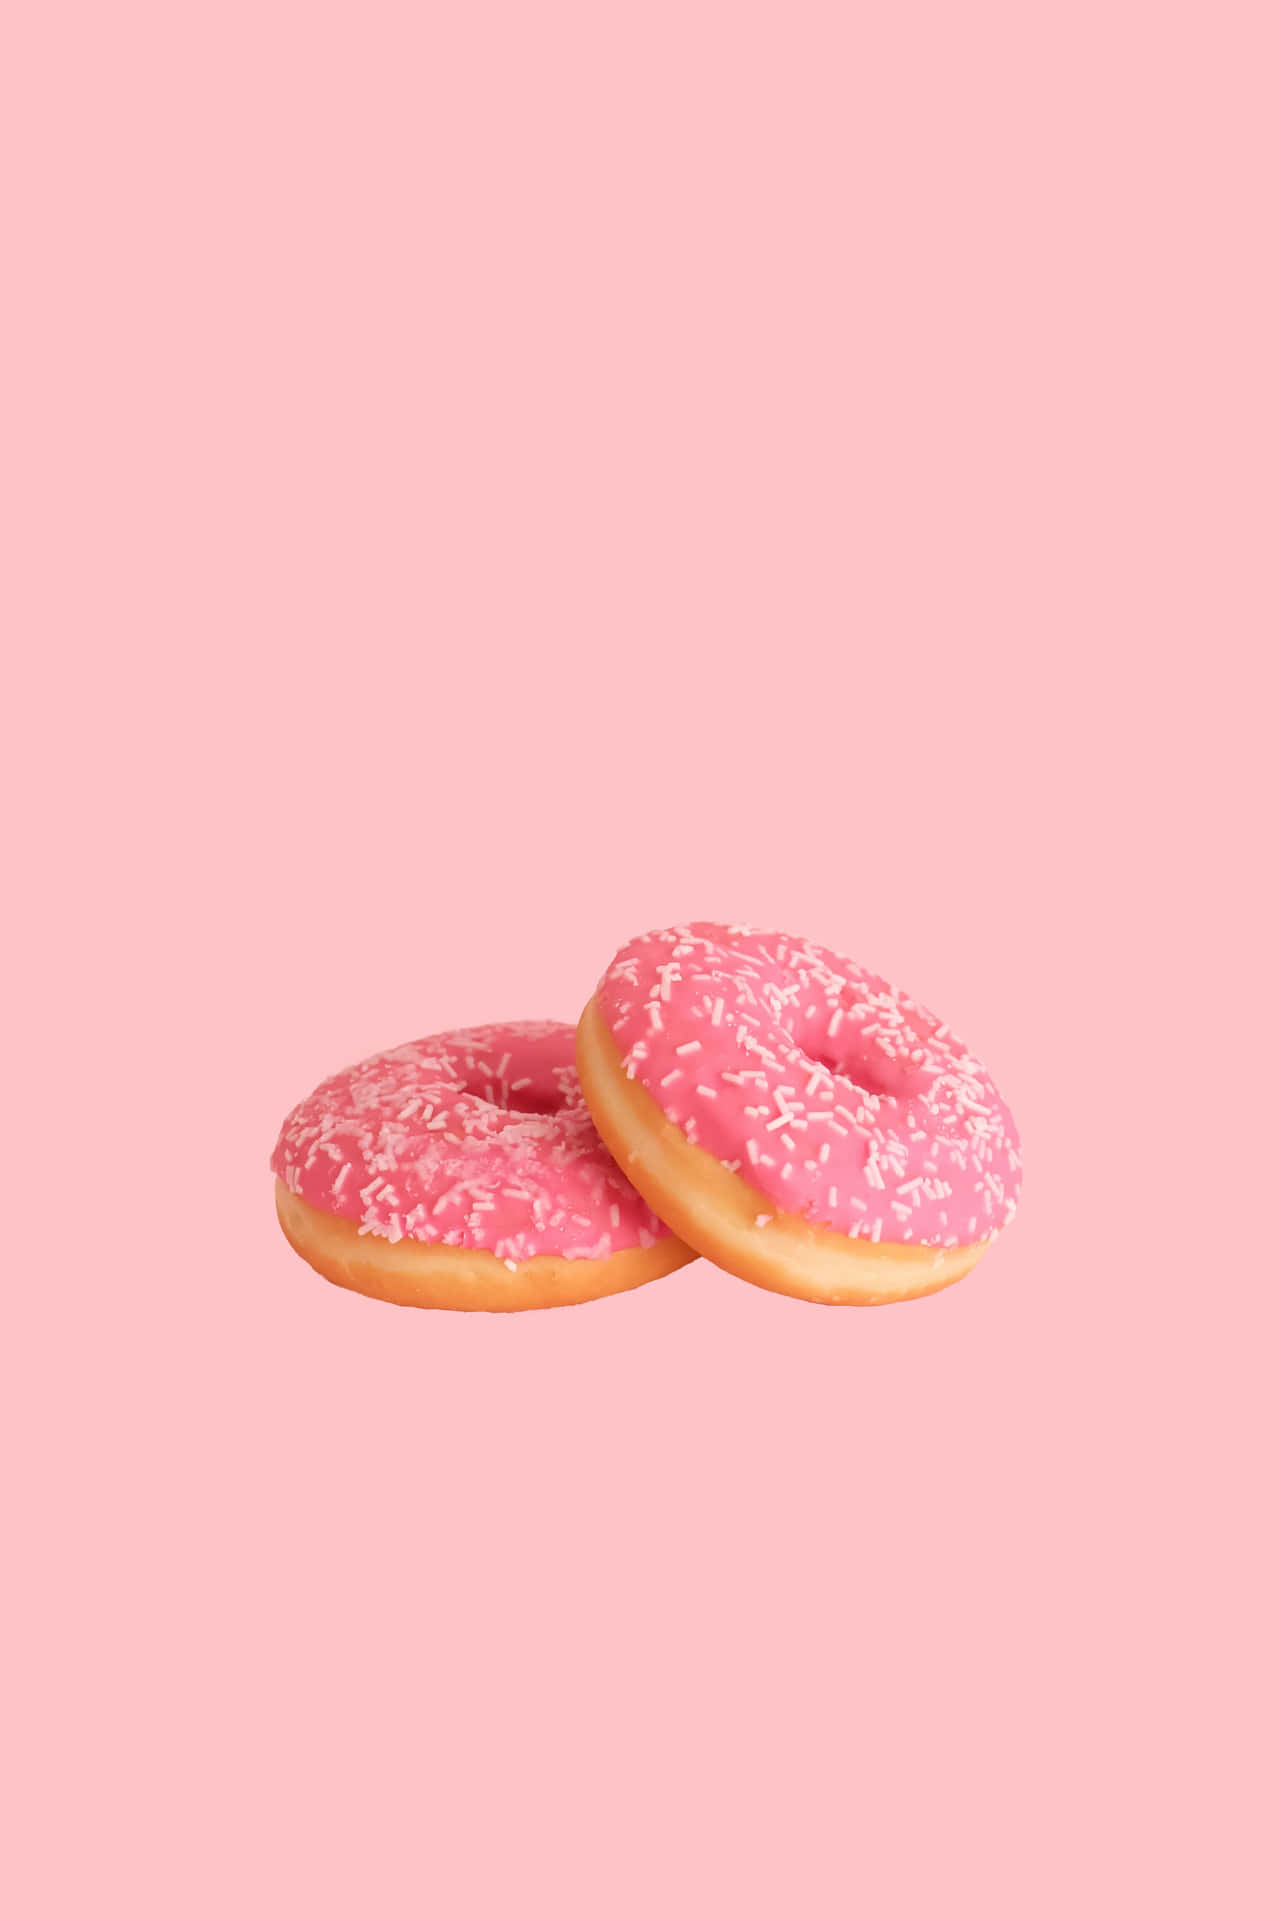 Two Strawberry Doughnuts Color Background